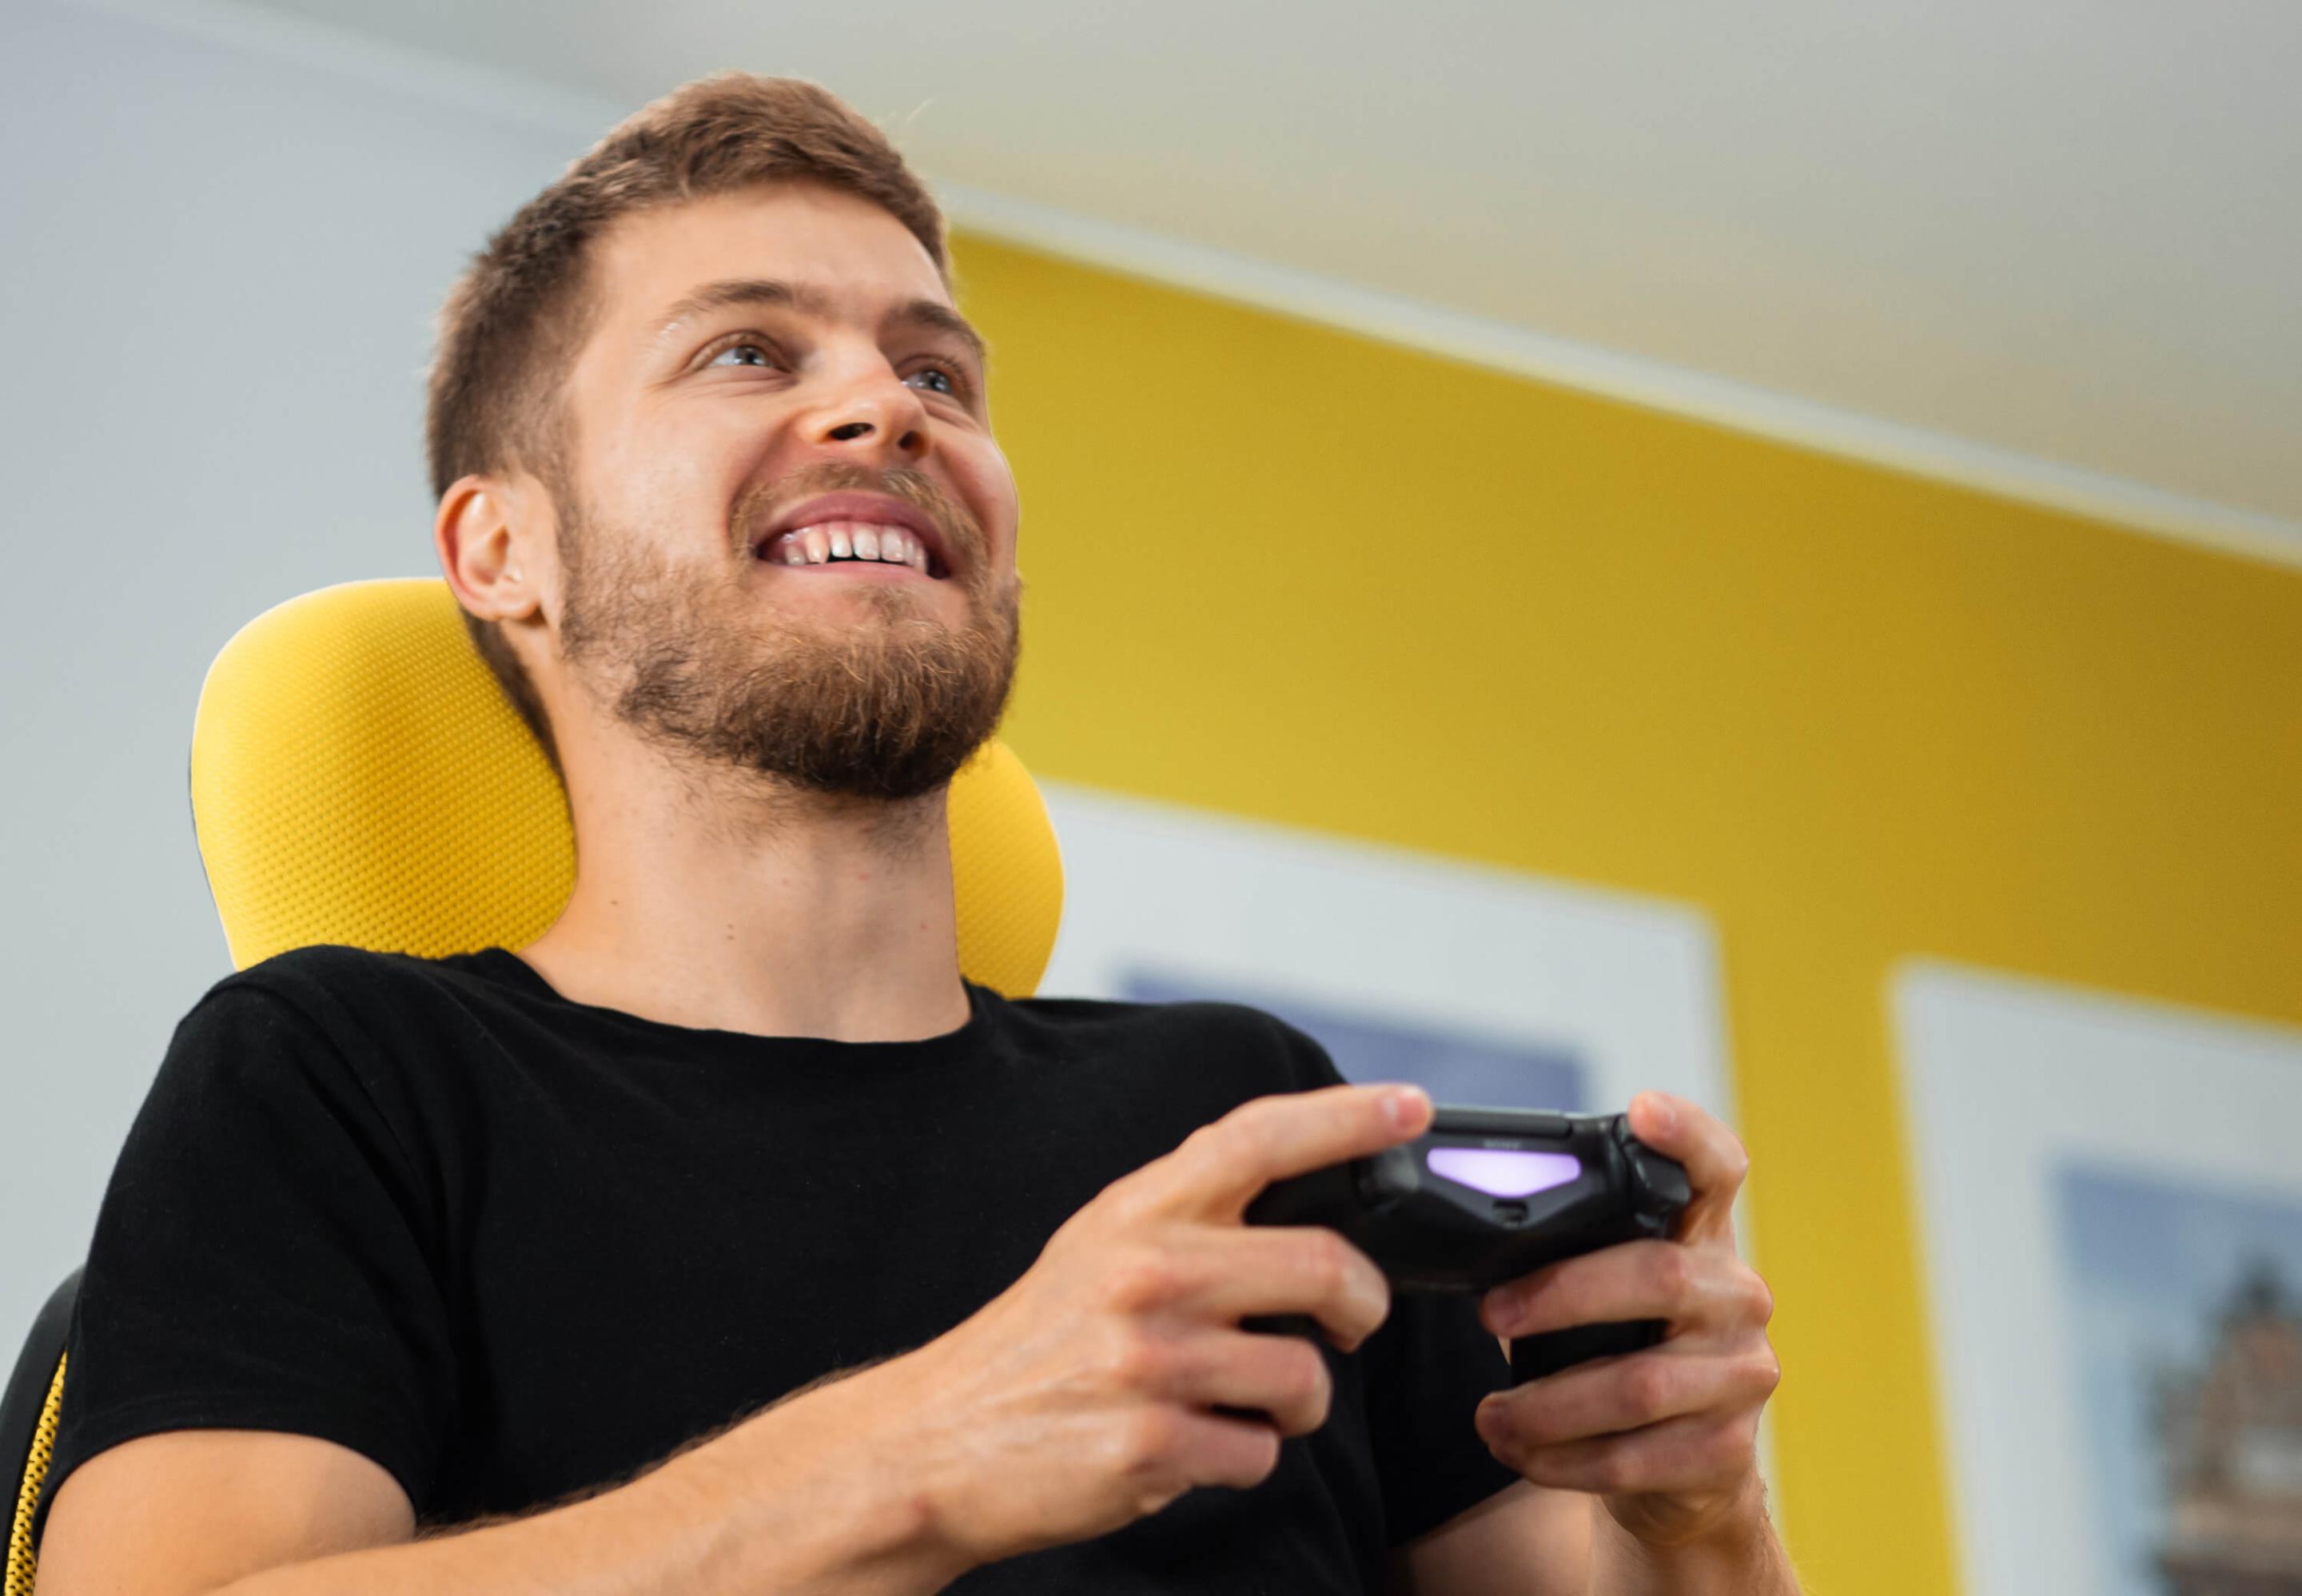 A photo of a man holding a Playstation gamepad